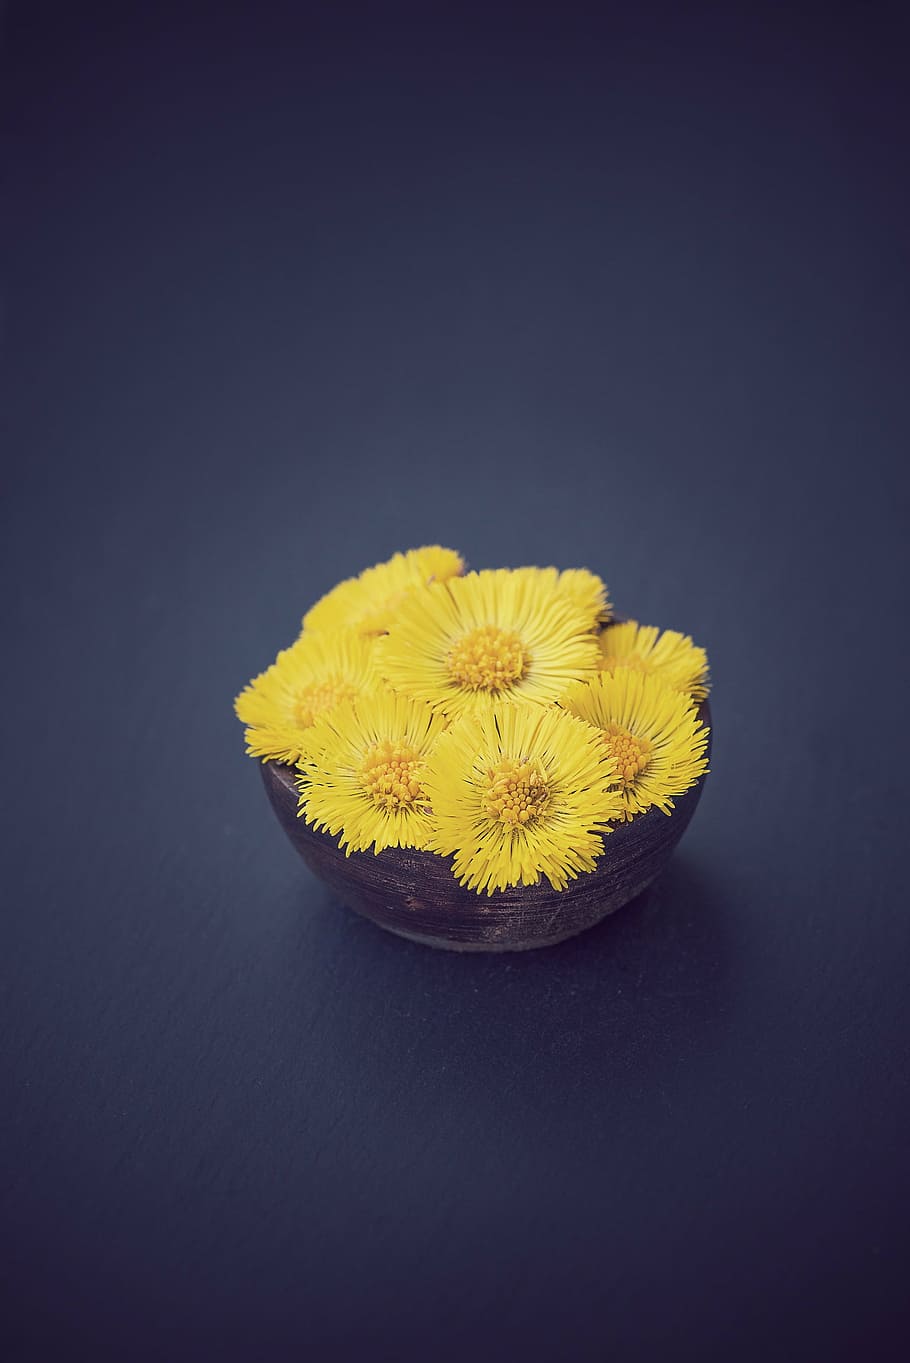 tussilago farfara, flower, flowers, yellow flowers, yellow, bowls, early bloomer, close, text dom, negative space